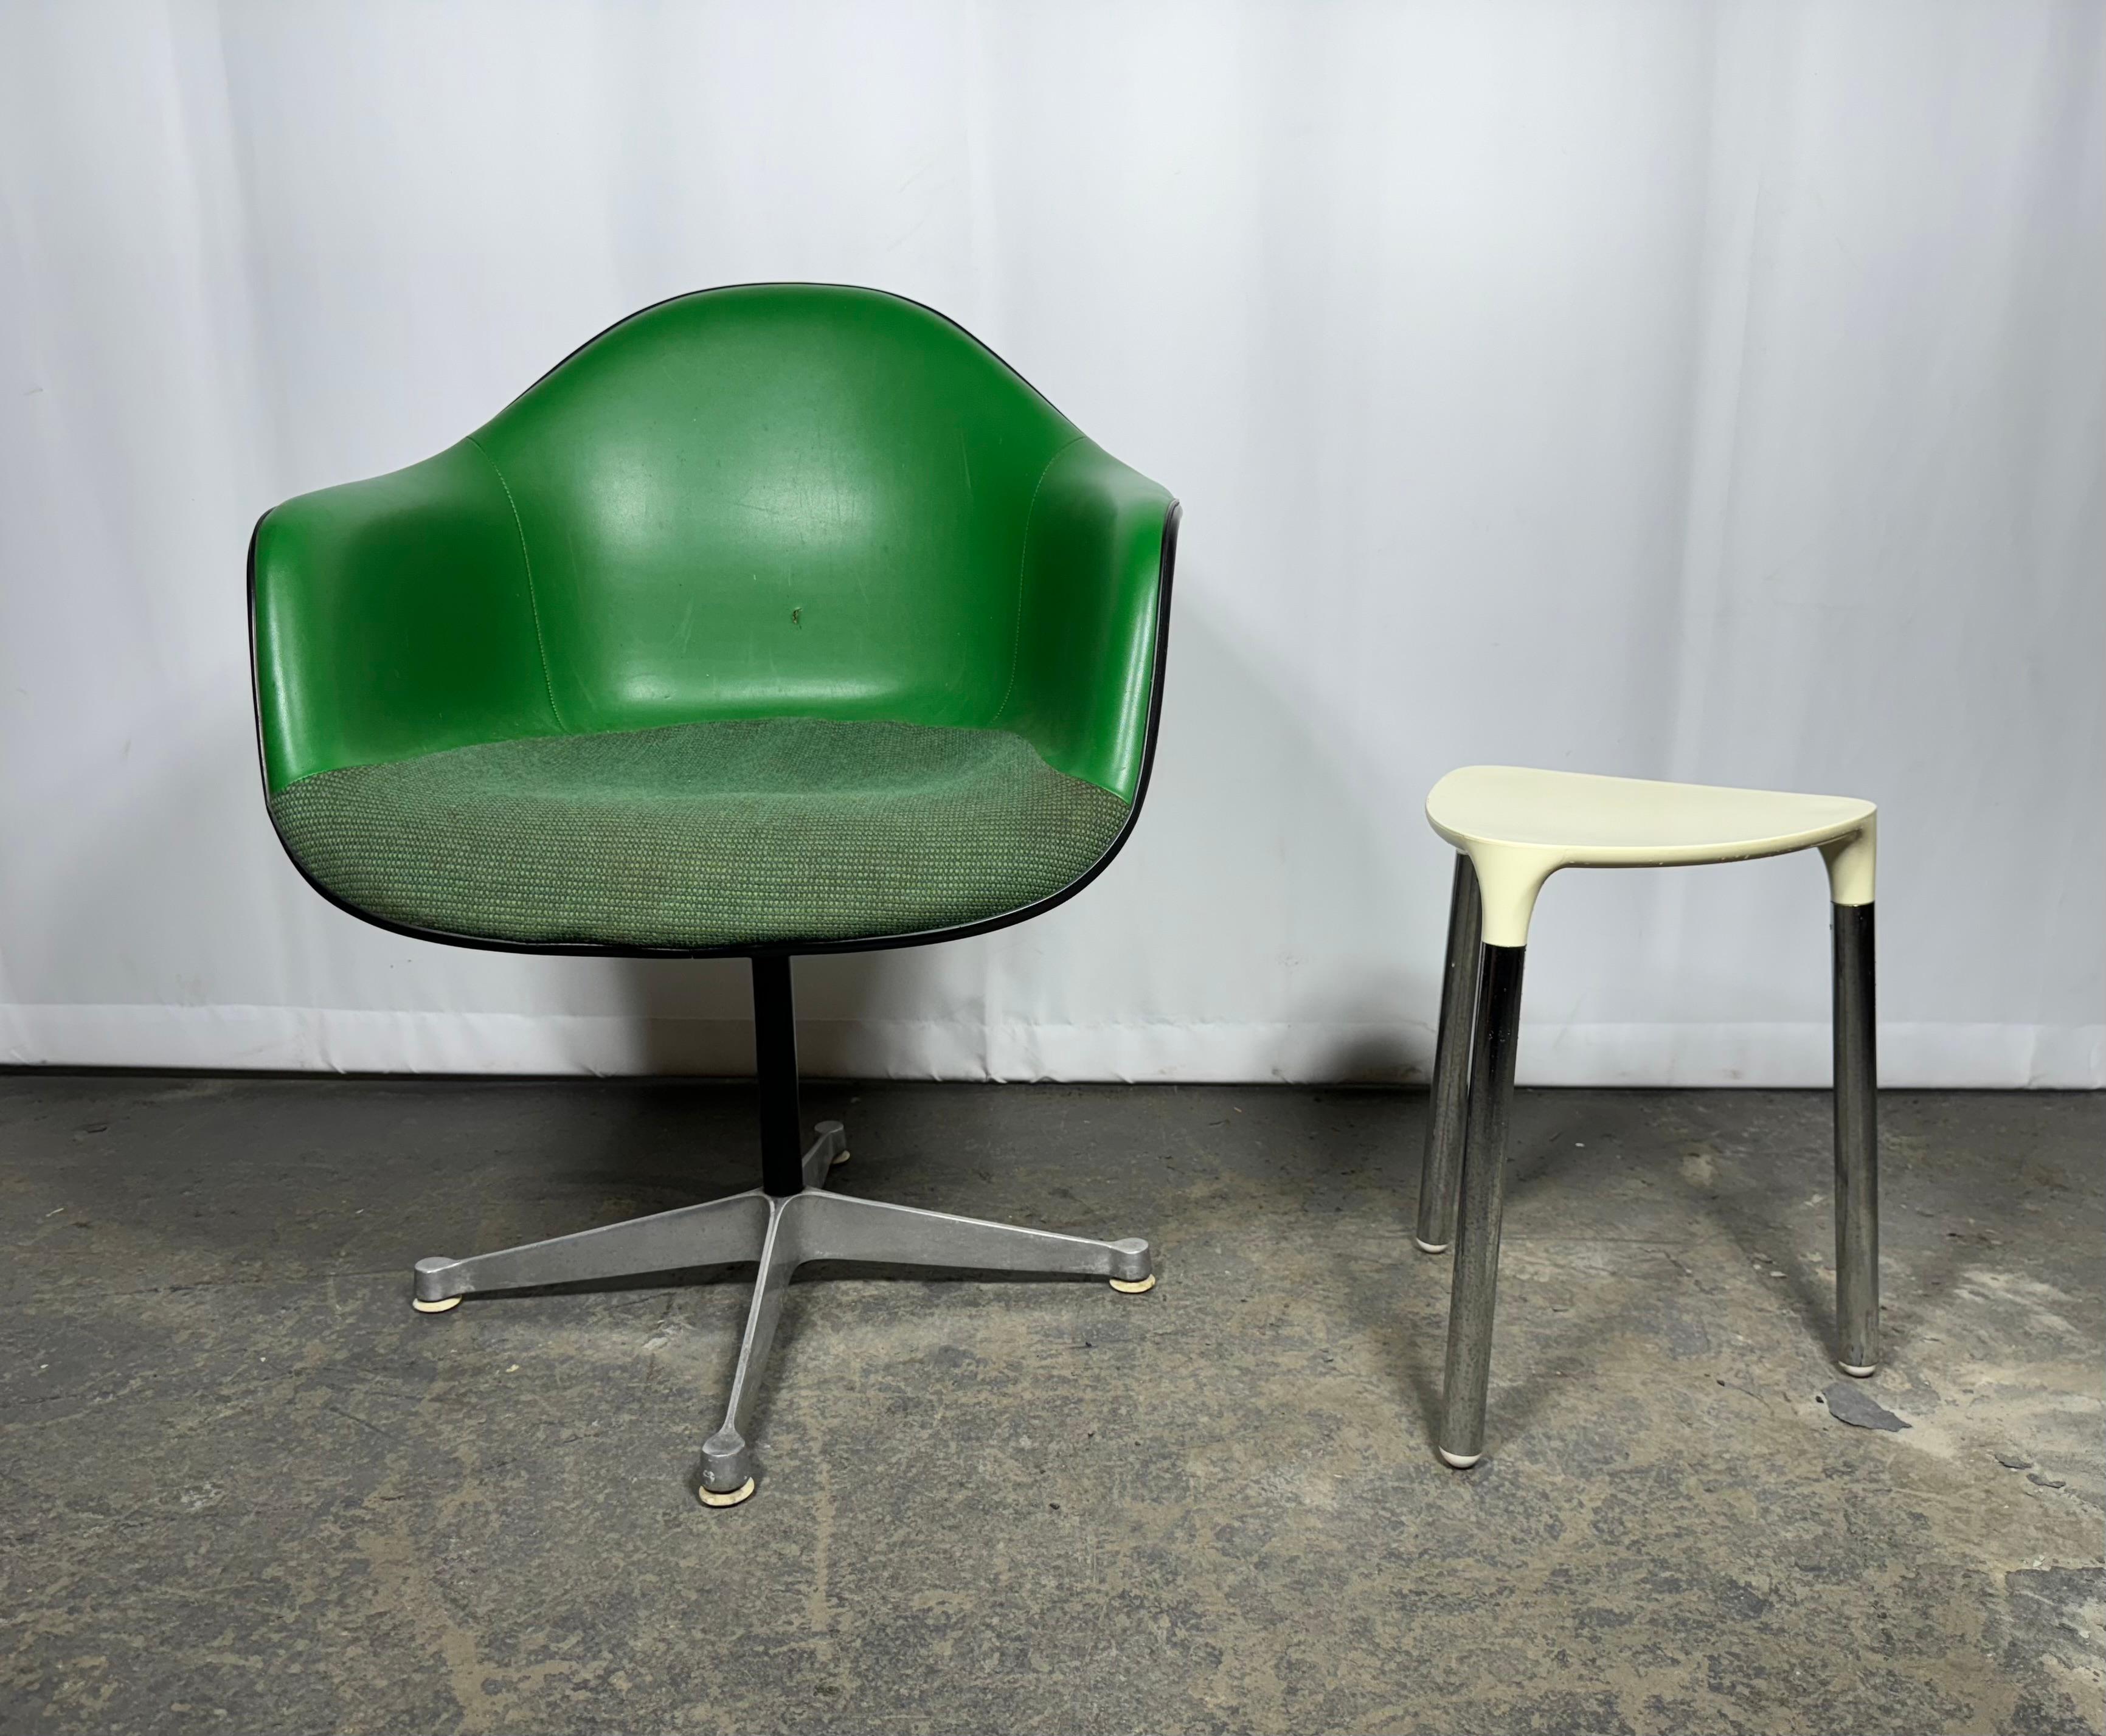 Unusual Charles Eames / Herman Miller / Girard  Padded Arm Shell Swivel Aluminum Base.. White fiberglass shell with amazing green naugahyde and Alexander Girard fabric seat. small hole to naugahyde (see photo). Retains Herman Miller incised stamp.: